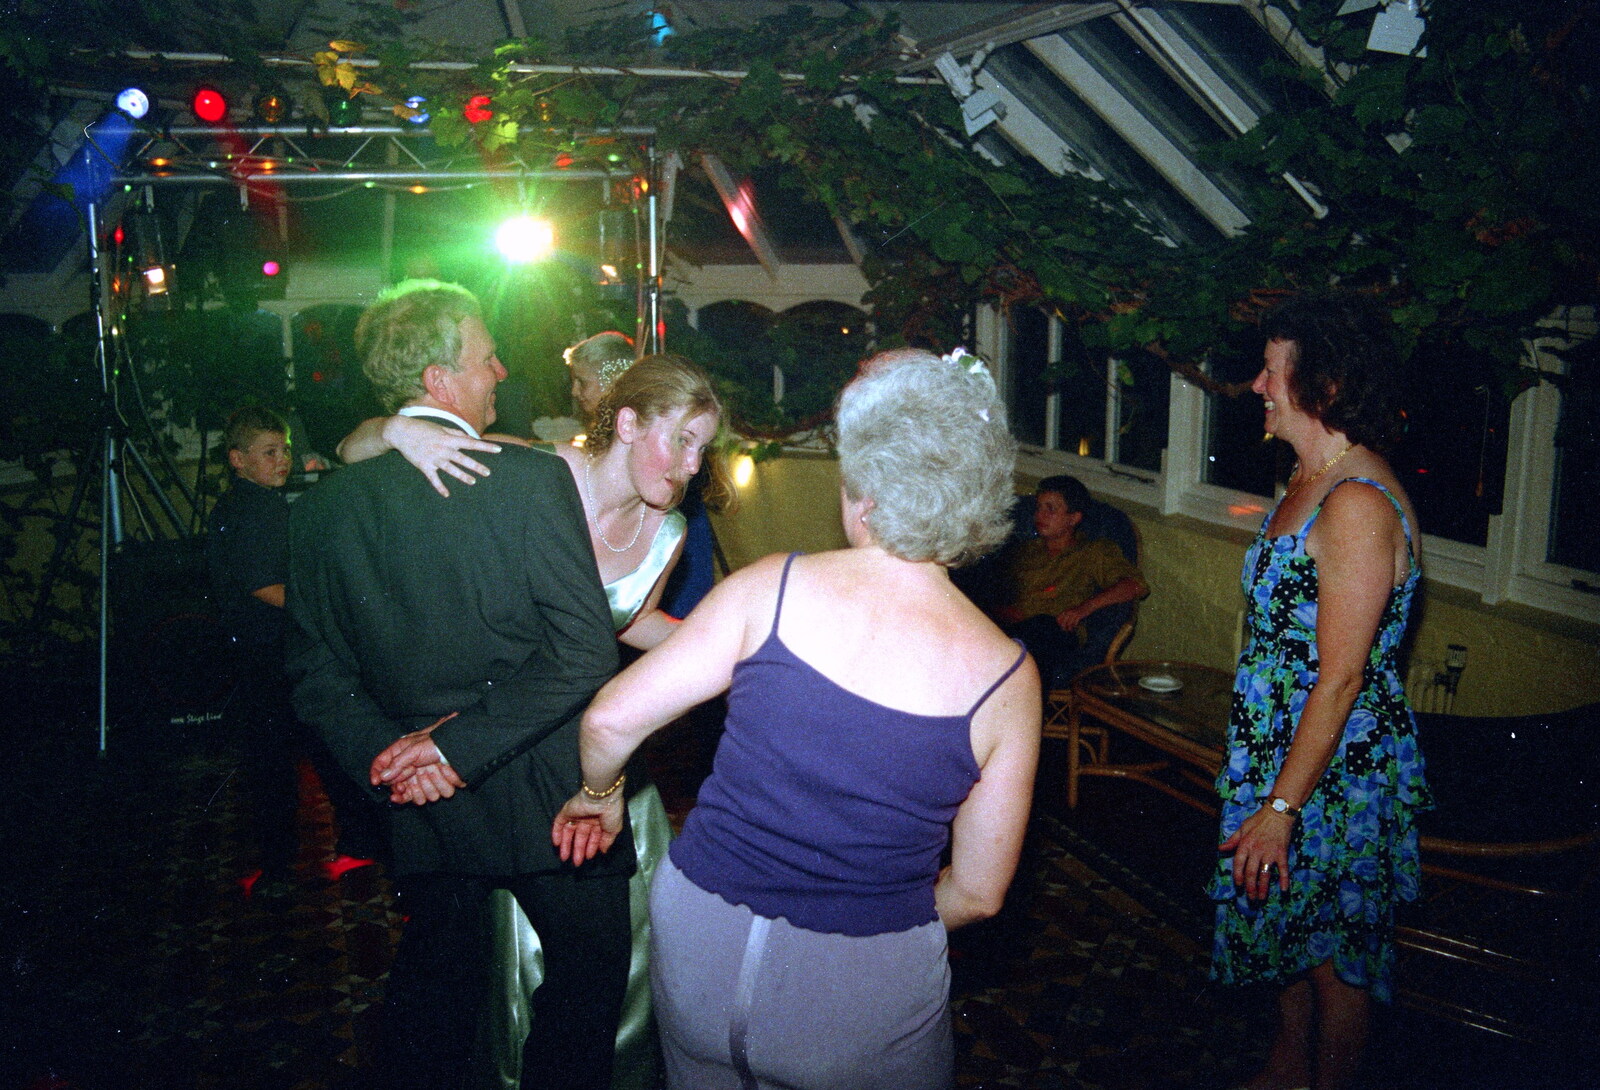 Dancing in the conservatory from Helen and Neil's Wedding, The Oaksmere, Brome, Suffolk - 4th August 2000